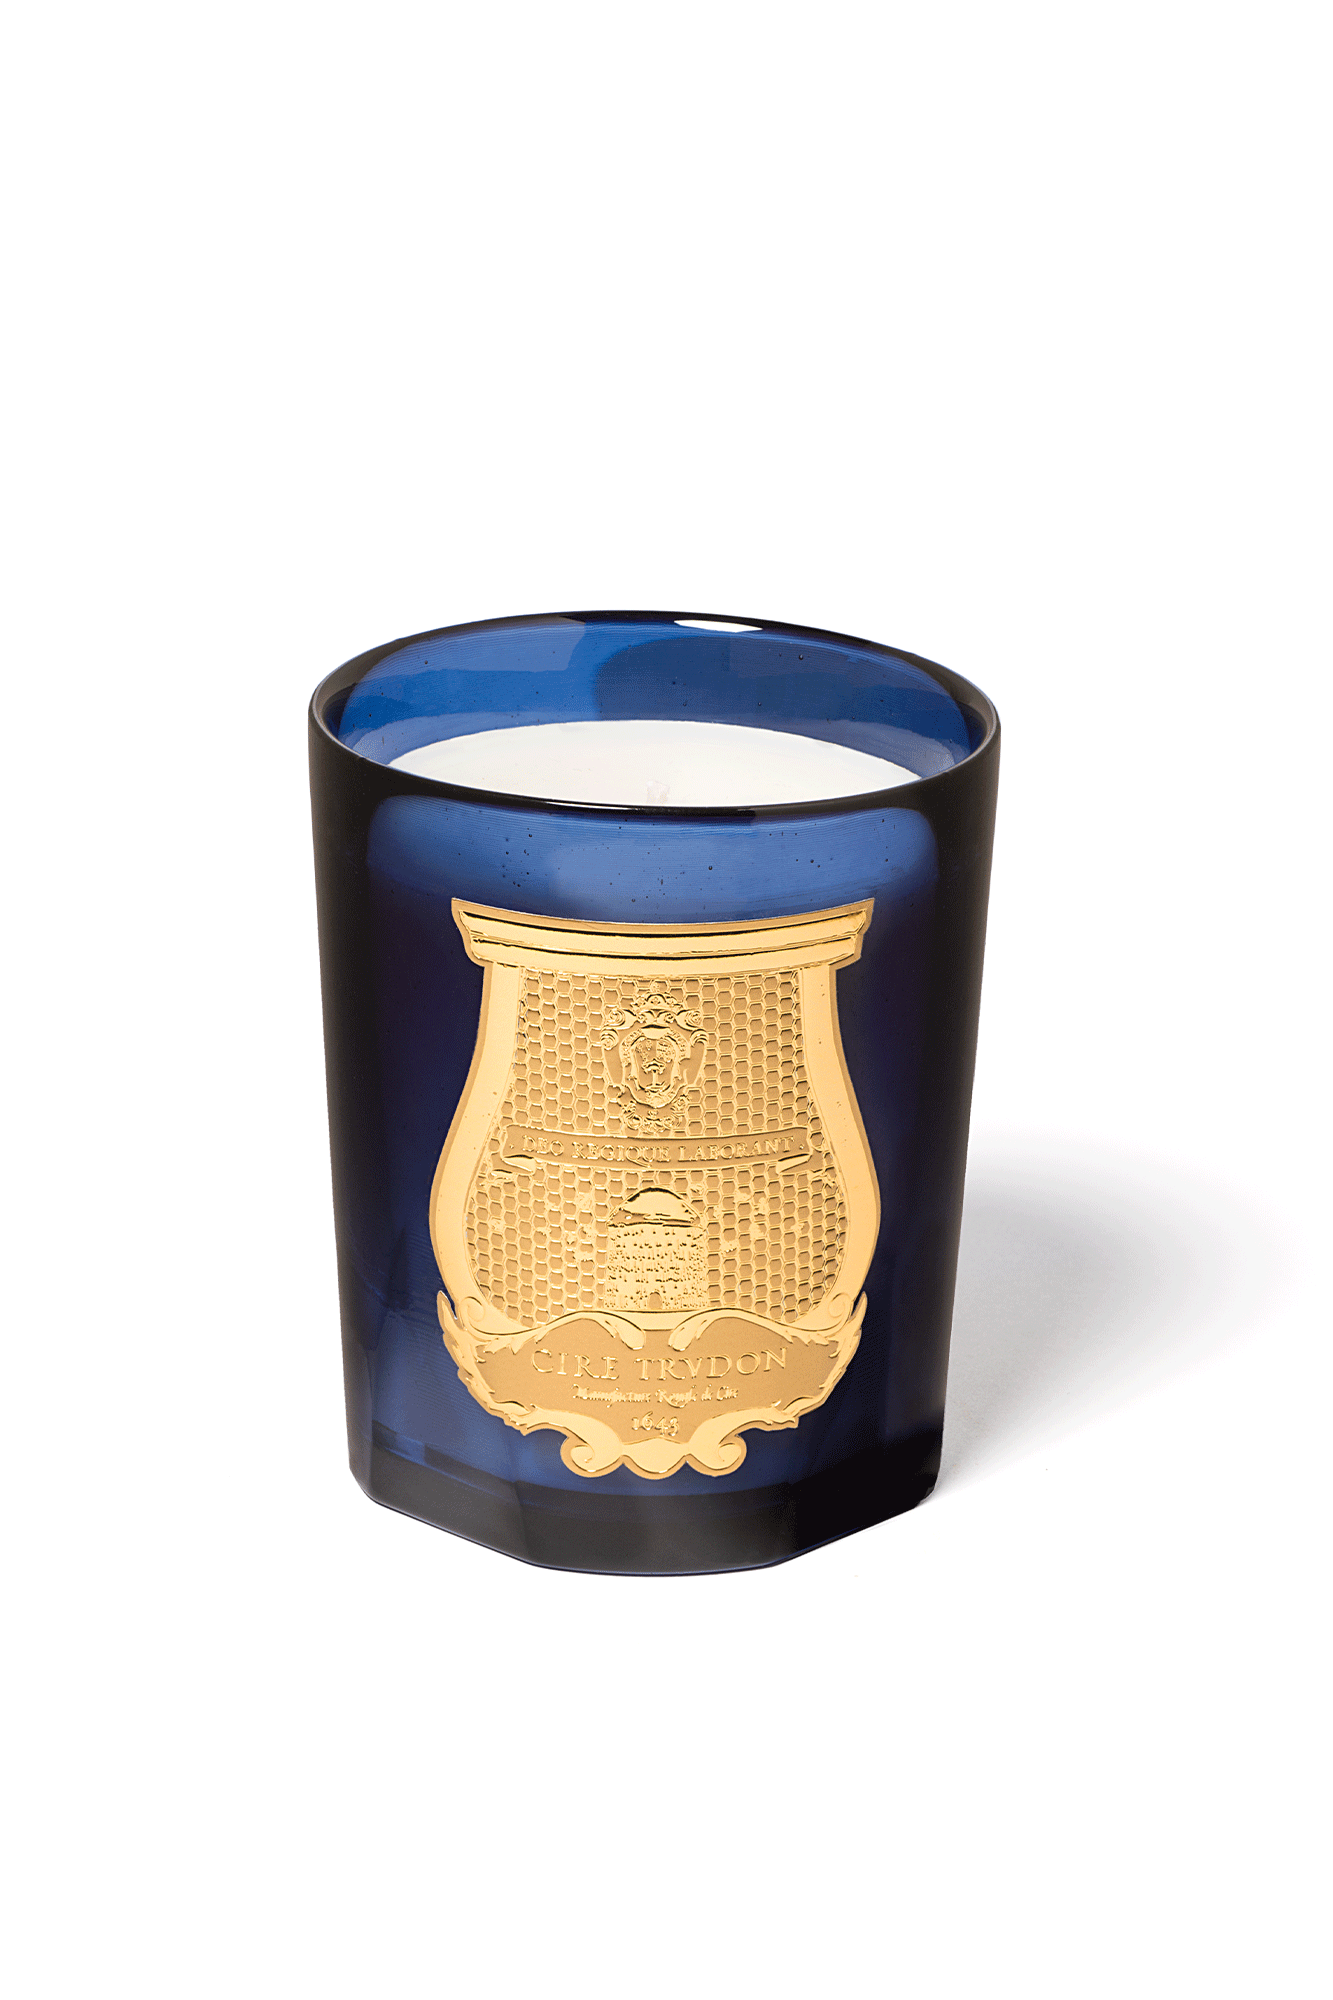 The Trudon Classic Candle fits all occasions and perfumes each and every room. Available in all scents, it is the most iconic of the collection. They are manufactured at the Trudon workshop in Normandy, France, using unrivaled know-how inherited from master candle makers.